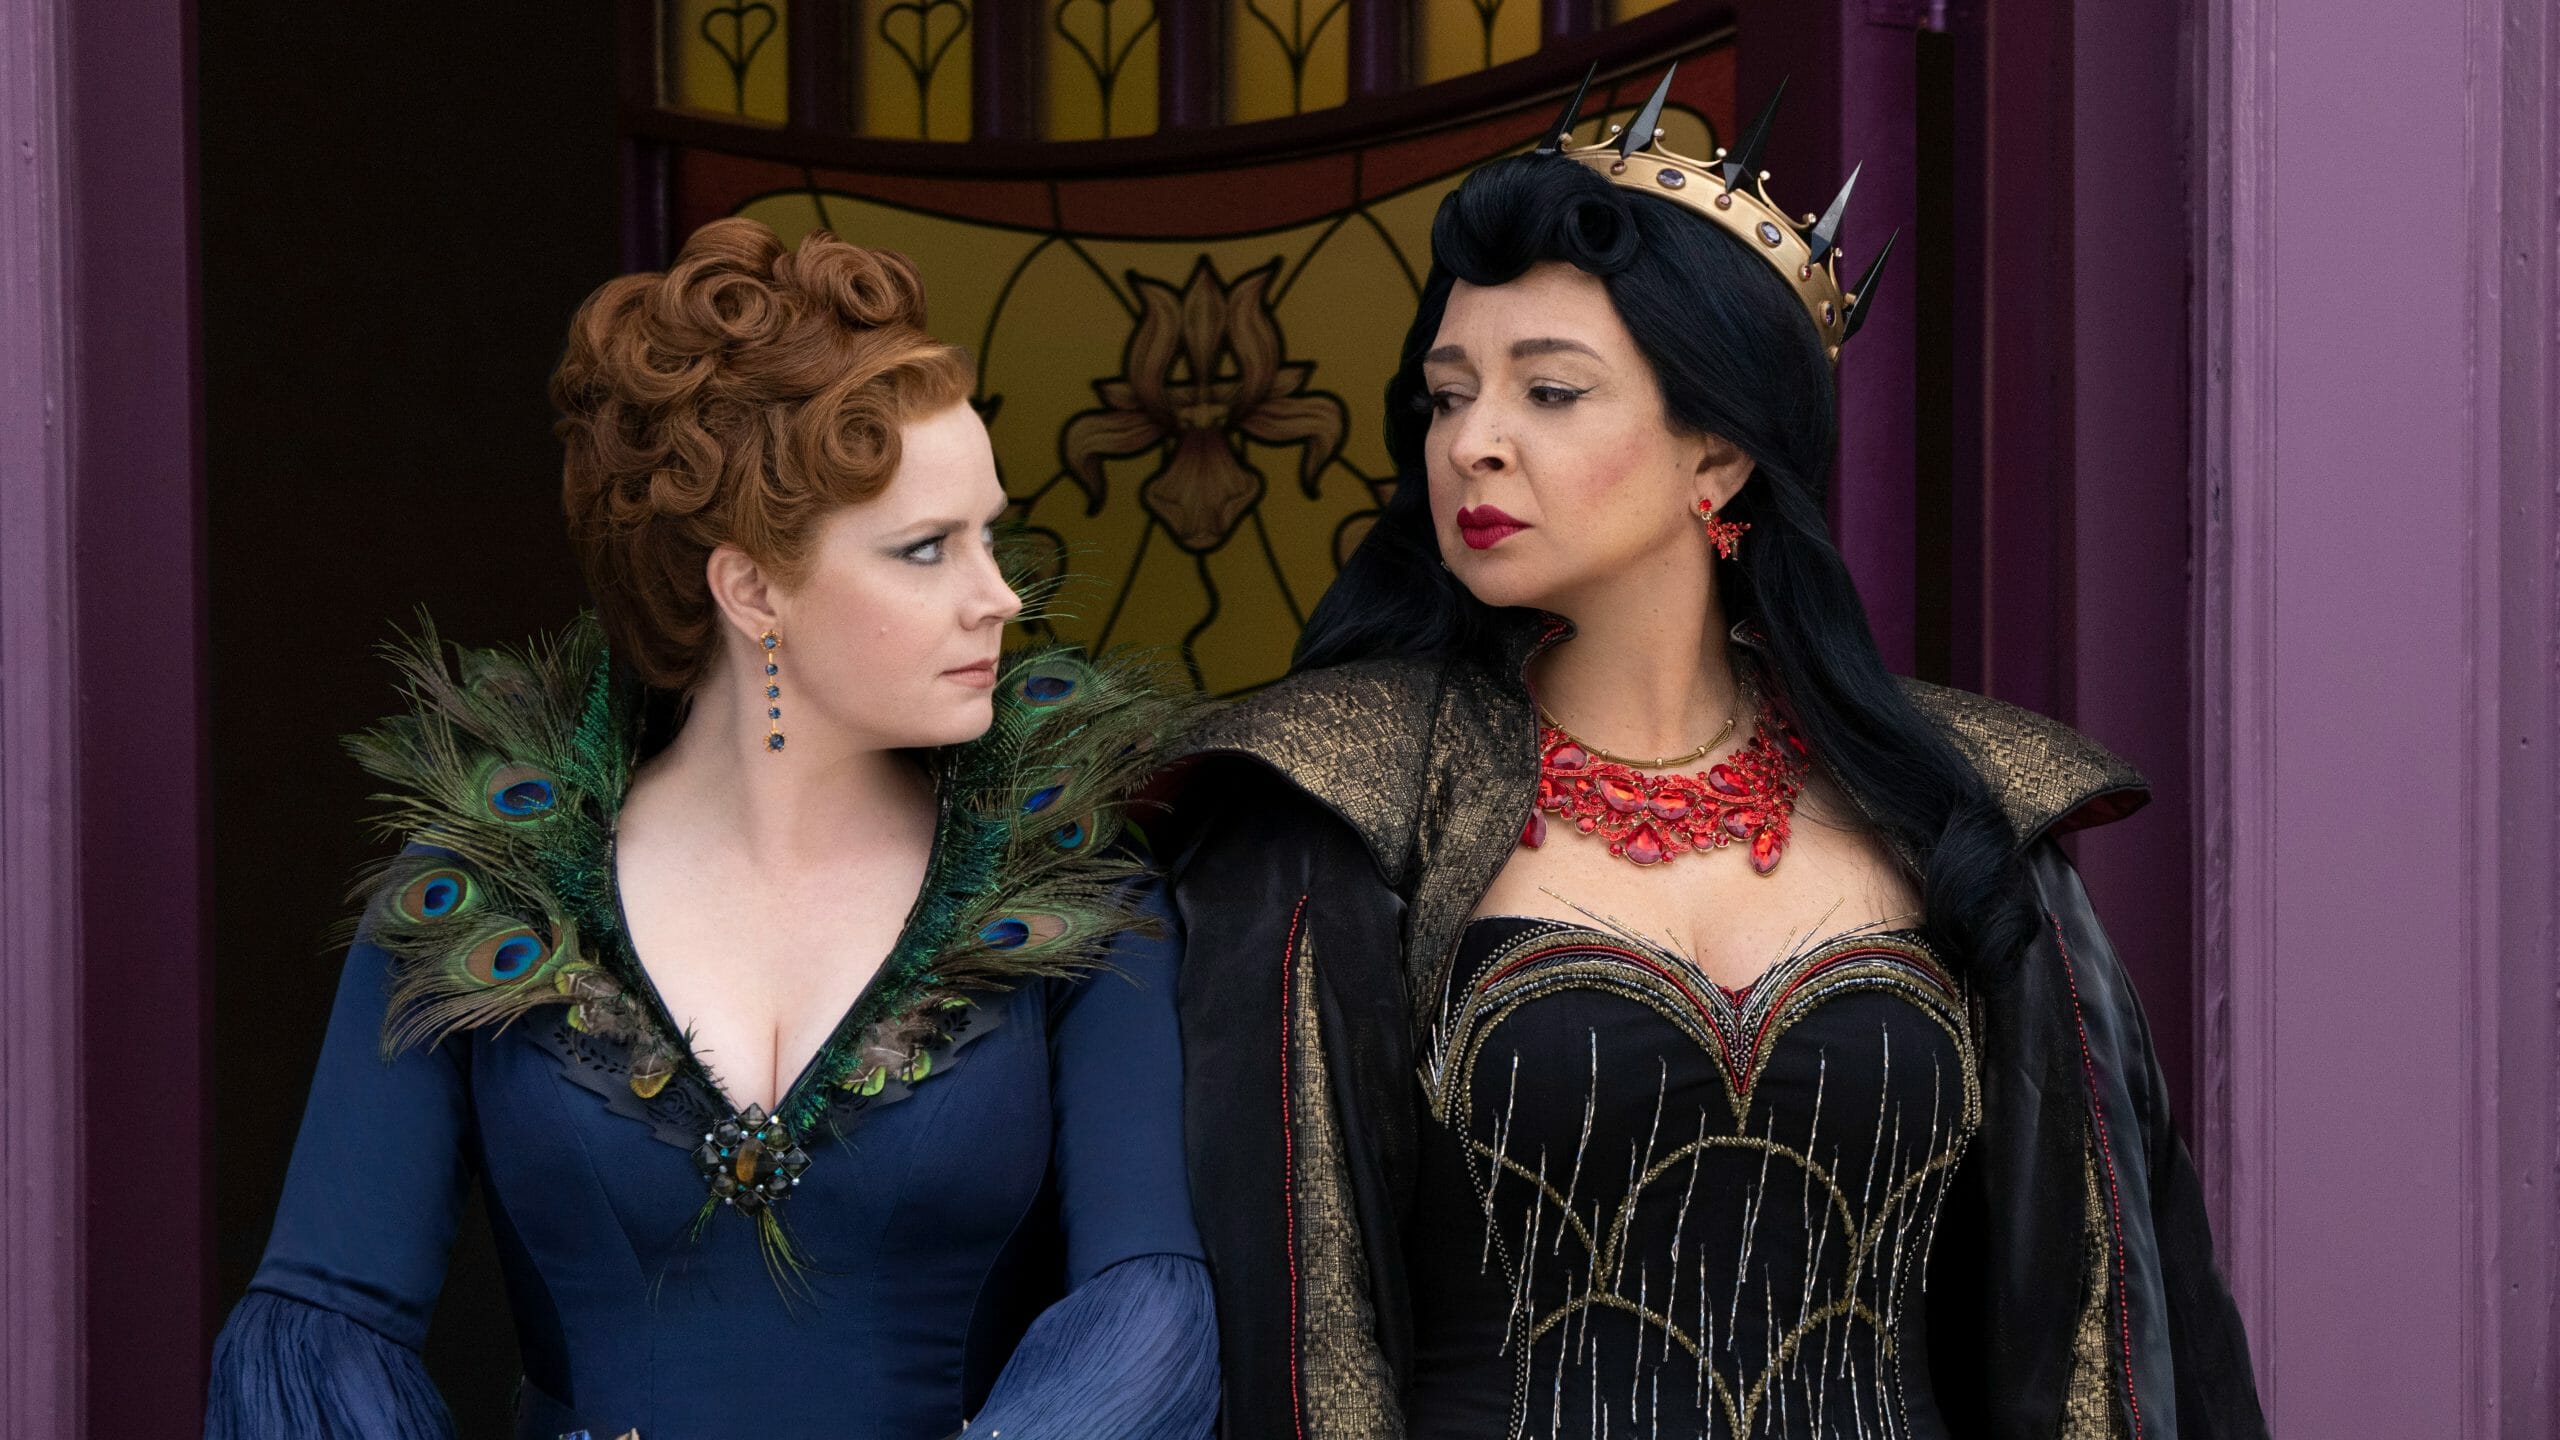 ‘Disenchanted’ Review – An Average Sequel Made for Streaming